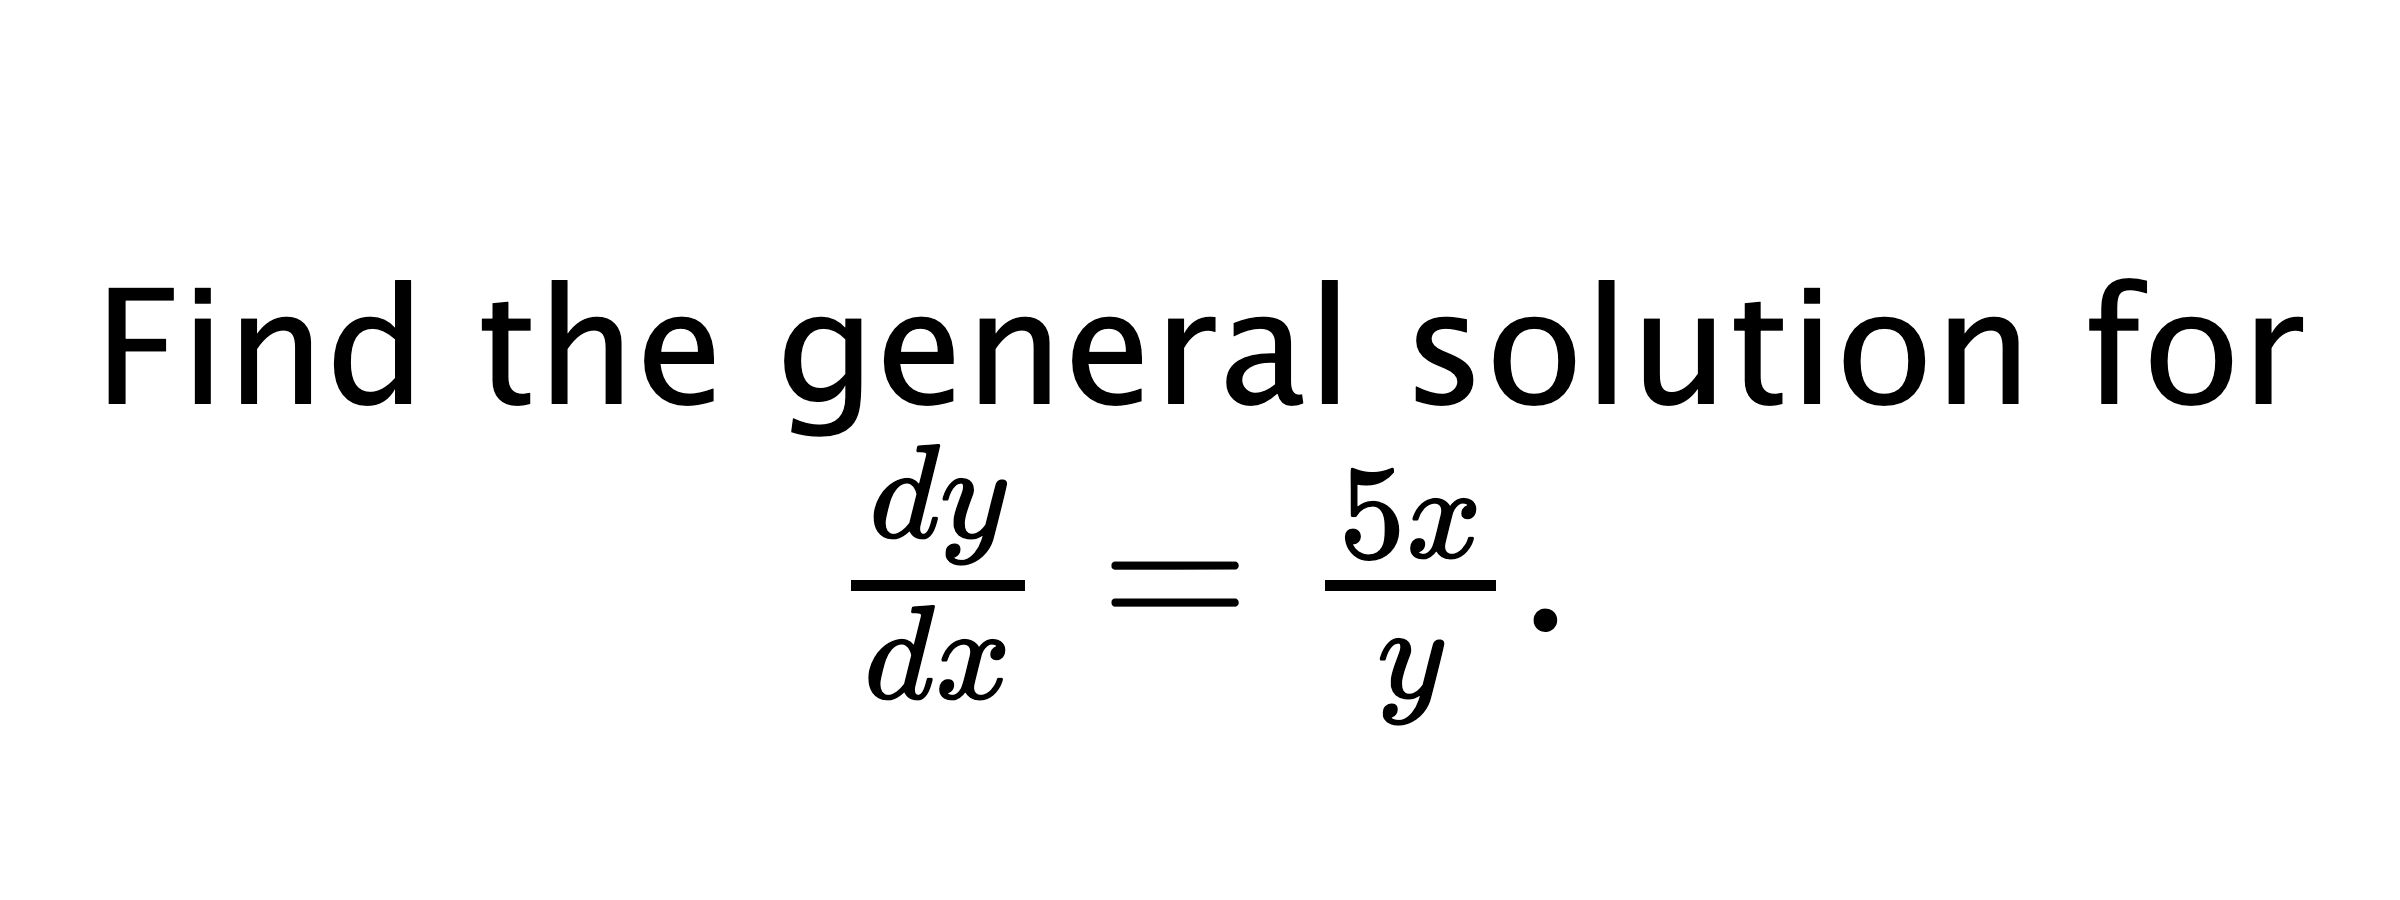  Find the general solution for $ \frac{dy}{dx}=\frac{5x}{y}. $